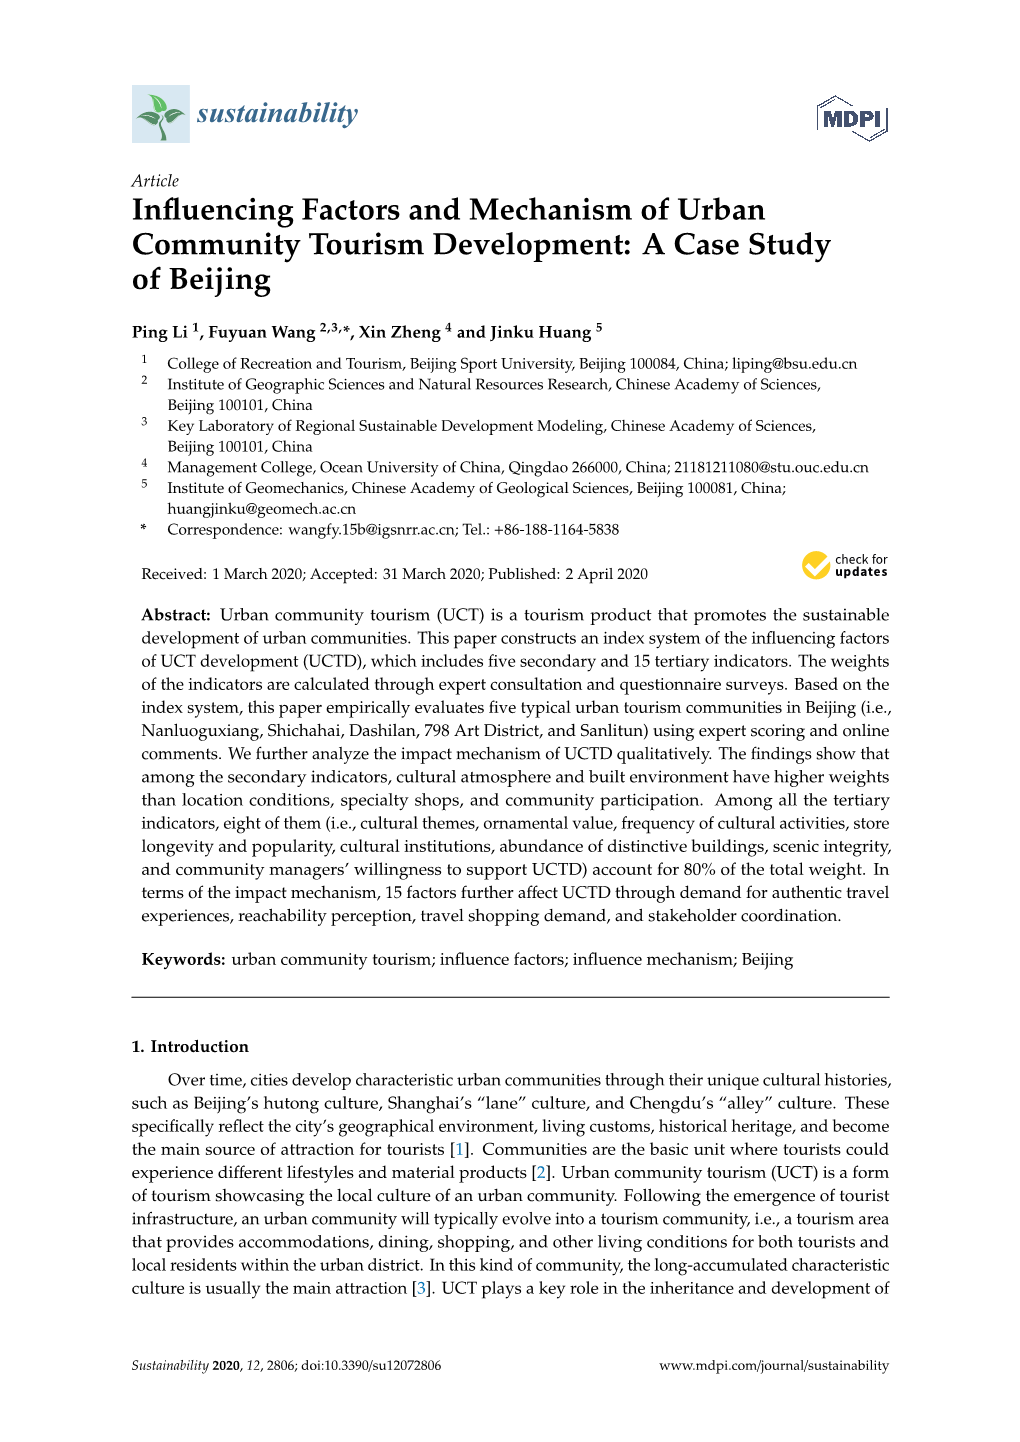 Influencing Factors and Mechanism of Urban Community Tourism